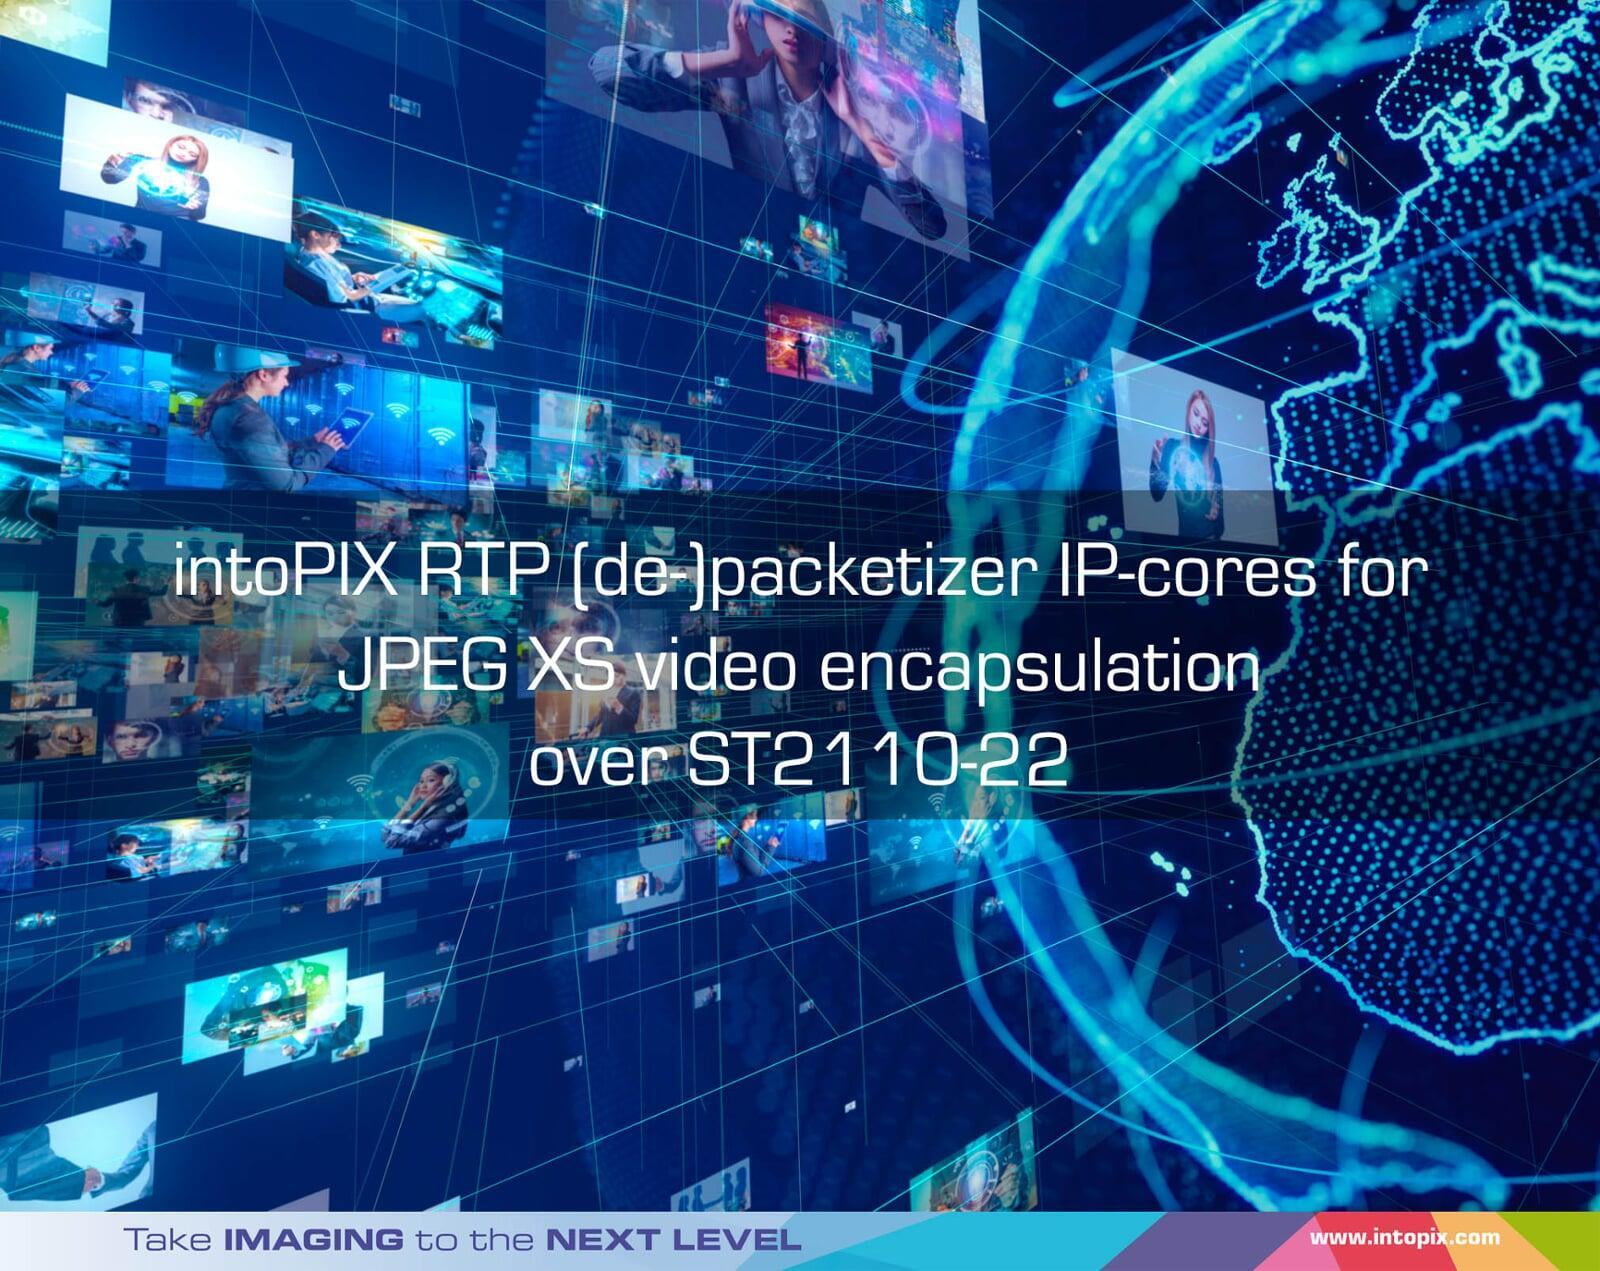 intoPIX releases RTP Packetization IP-cores for JPEG XS Video Encapsulation over SMPTE 2110-22